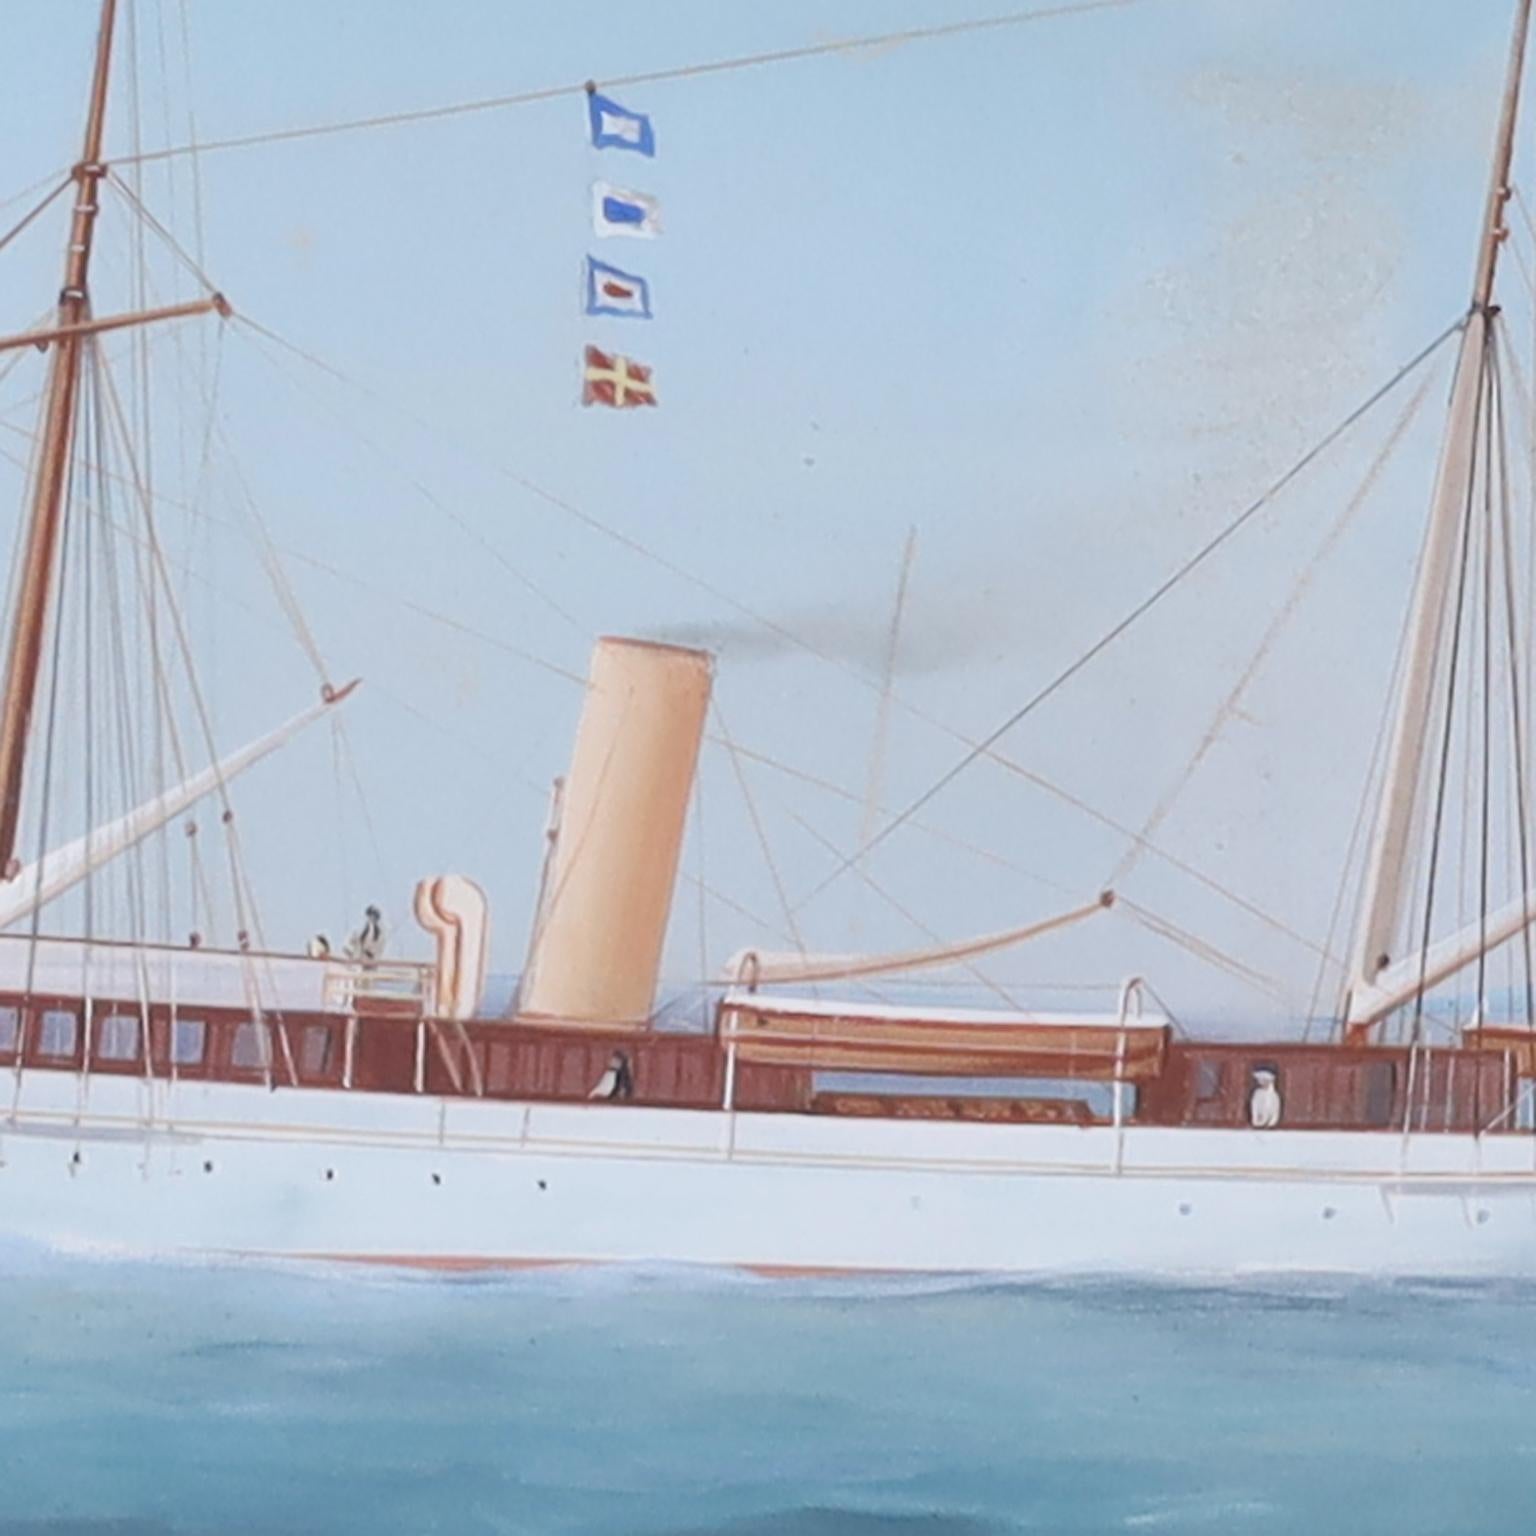 Antique painting of a steam powered yacht flying a British flag as seen on the Mediterranean sea with Mt. Vesuvius in the background. Executed in gouache by noted Italian marine artist Antonio De Simone in 1904. Presented in a mahogany frame under